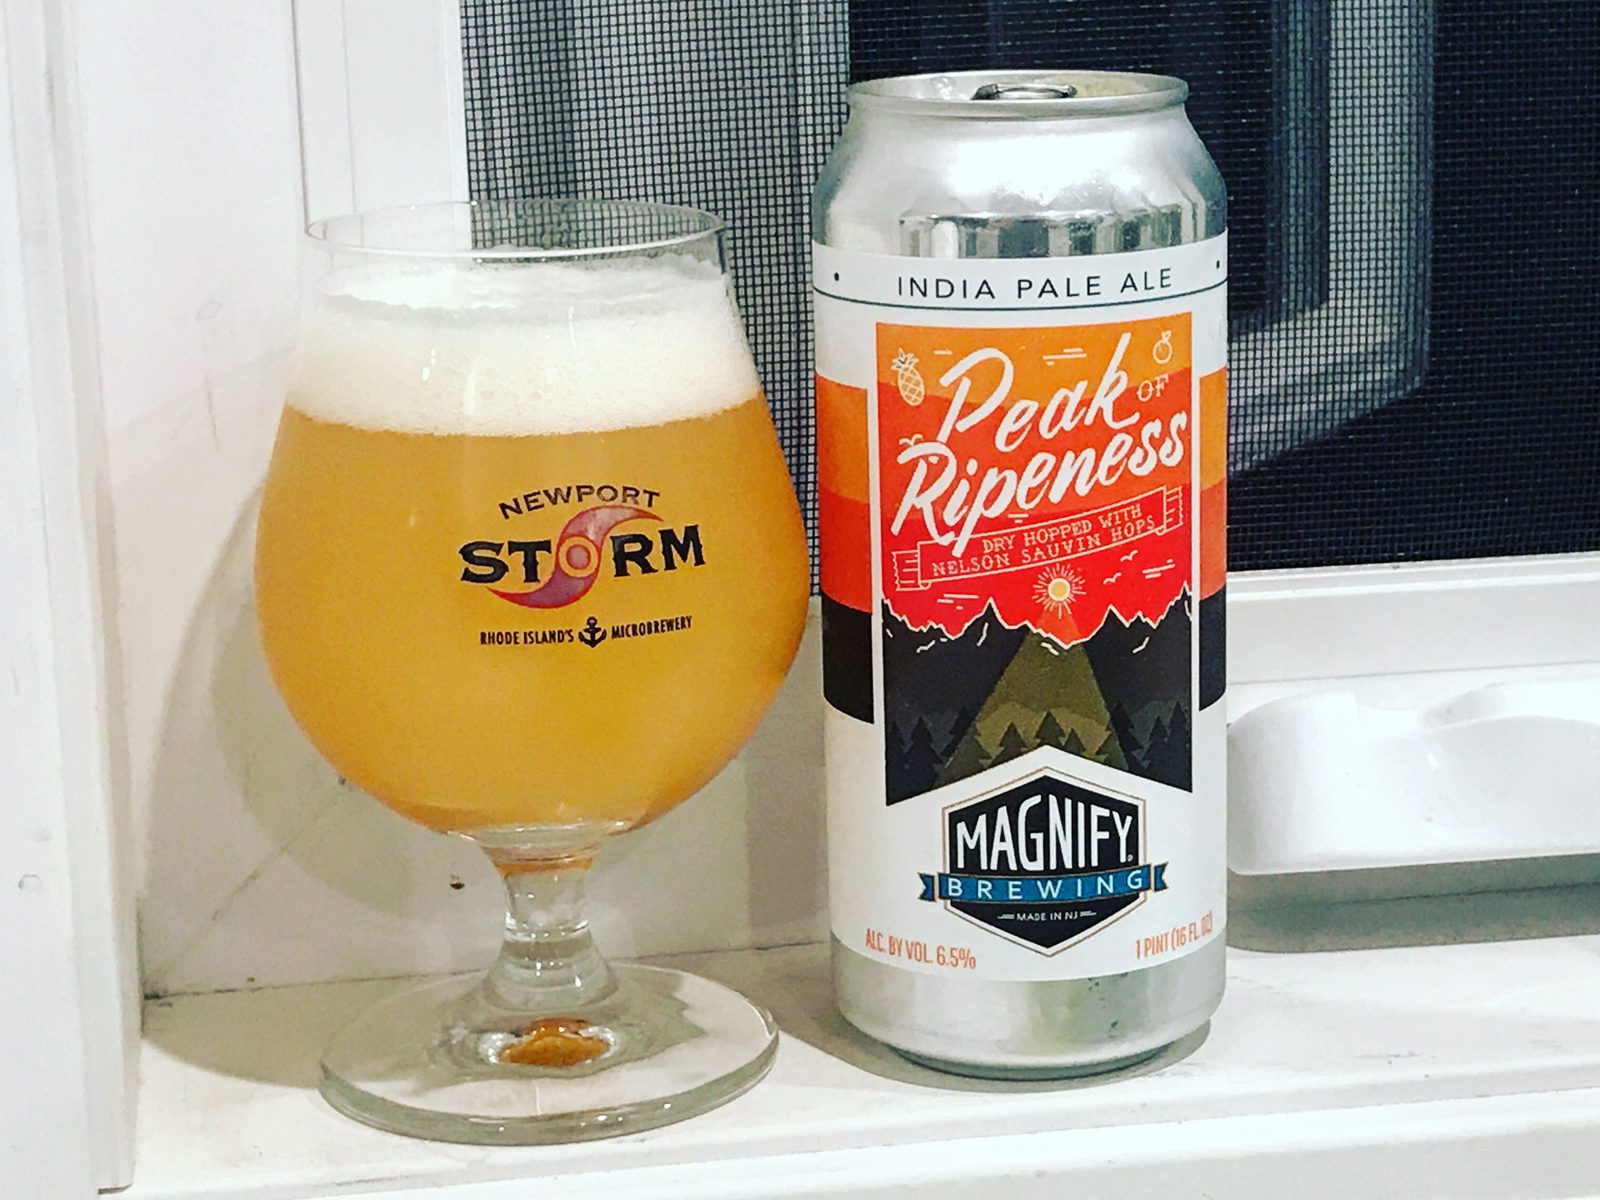 Magnify Brewing Company: Peak of Ripeness